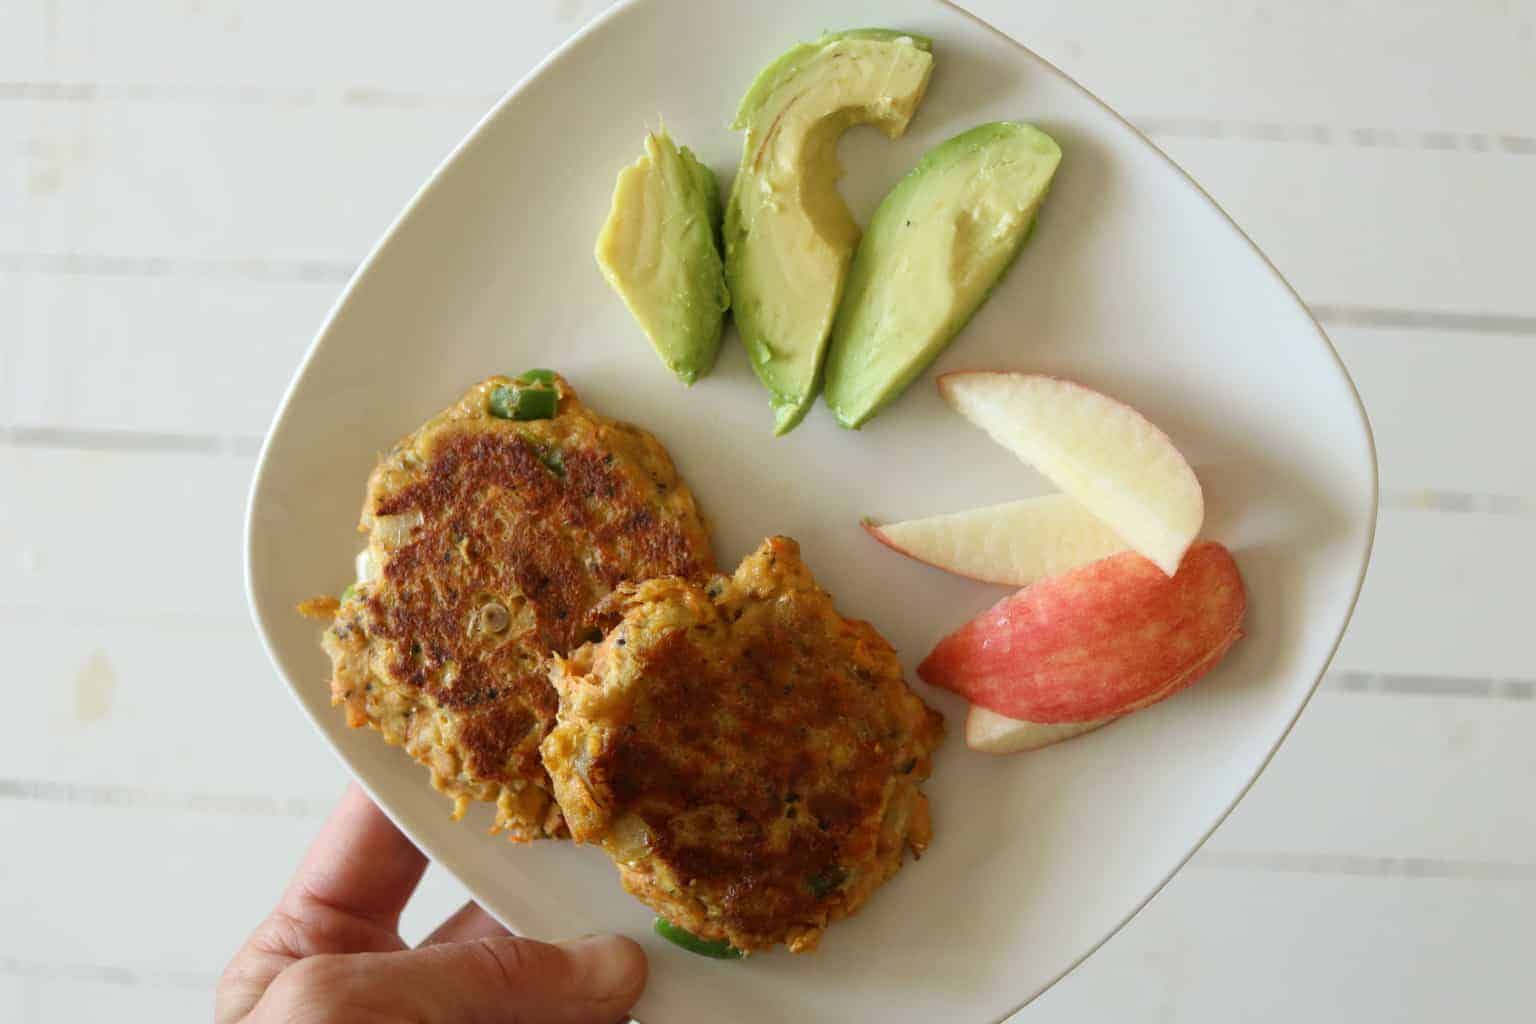 Salmon burgers with sliced avocado and apples.